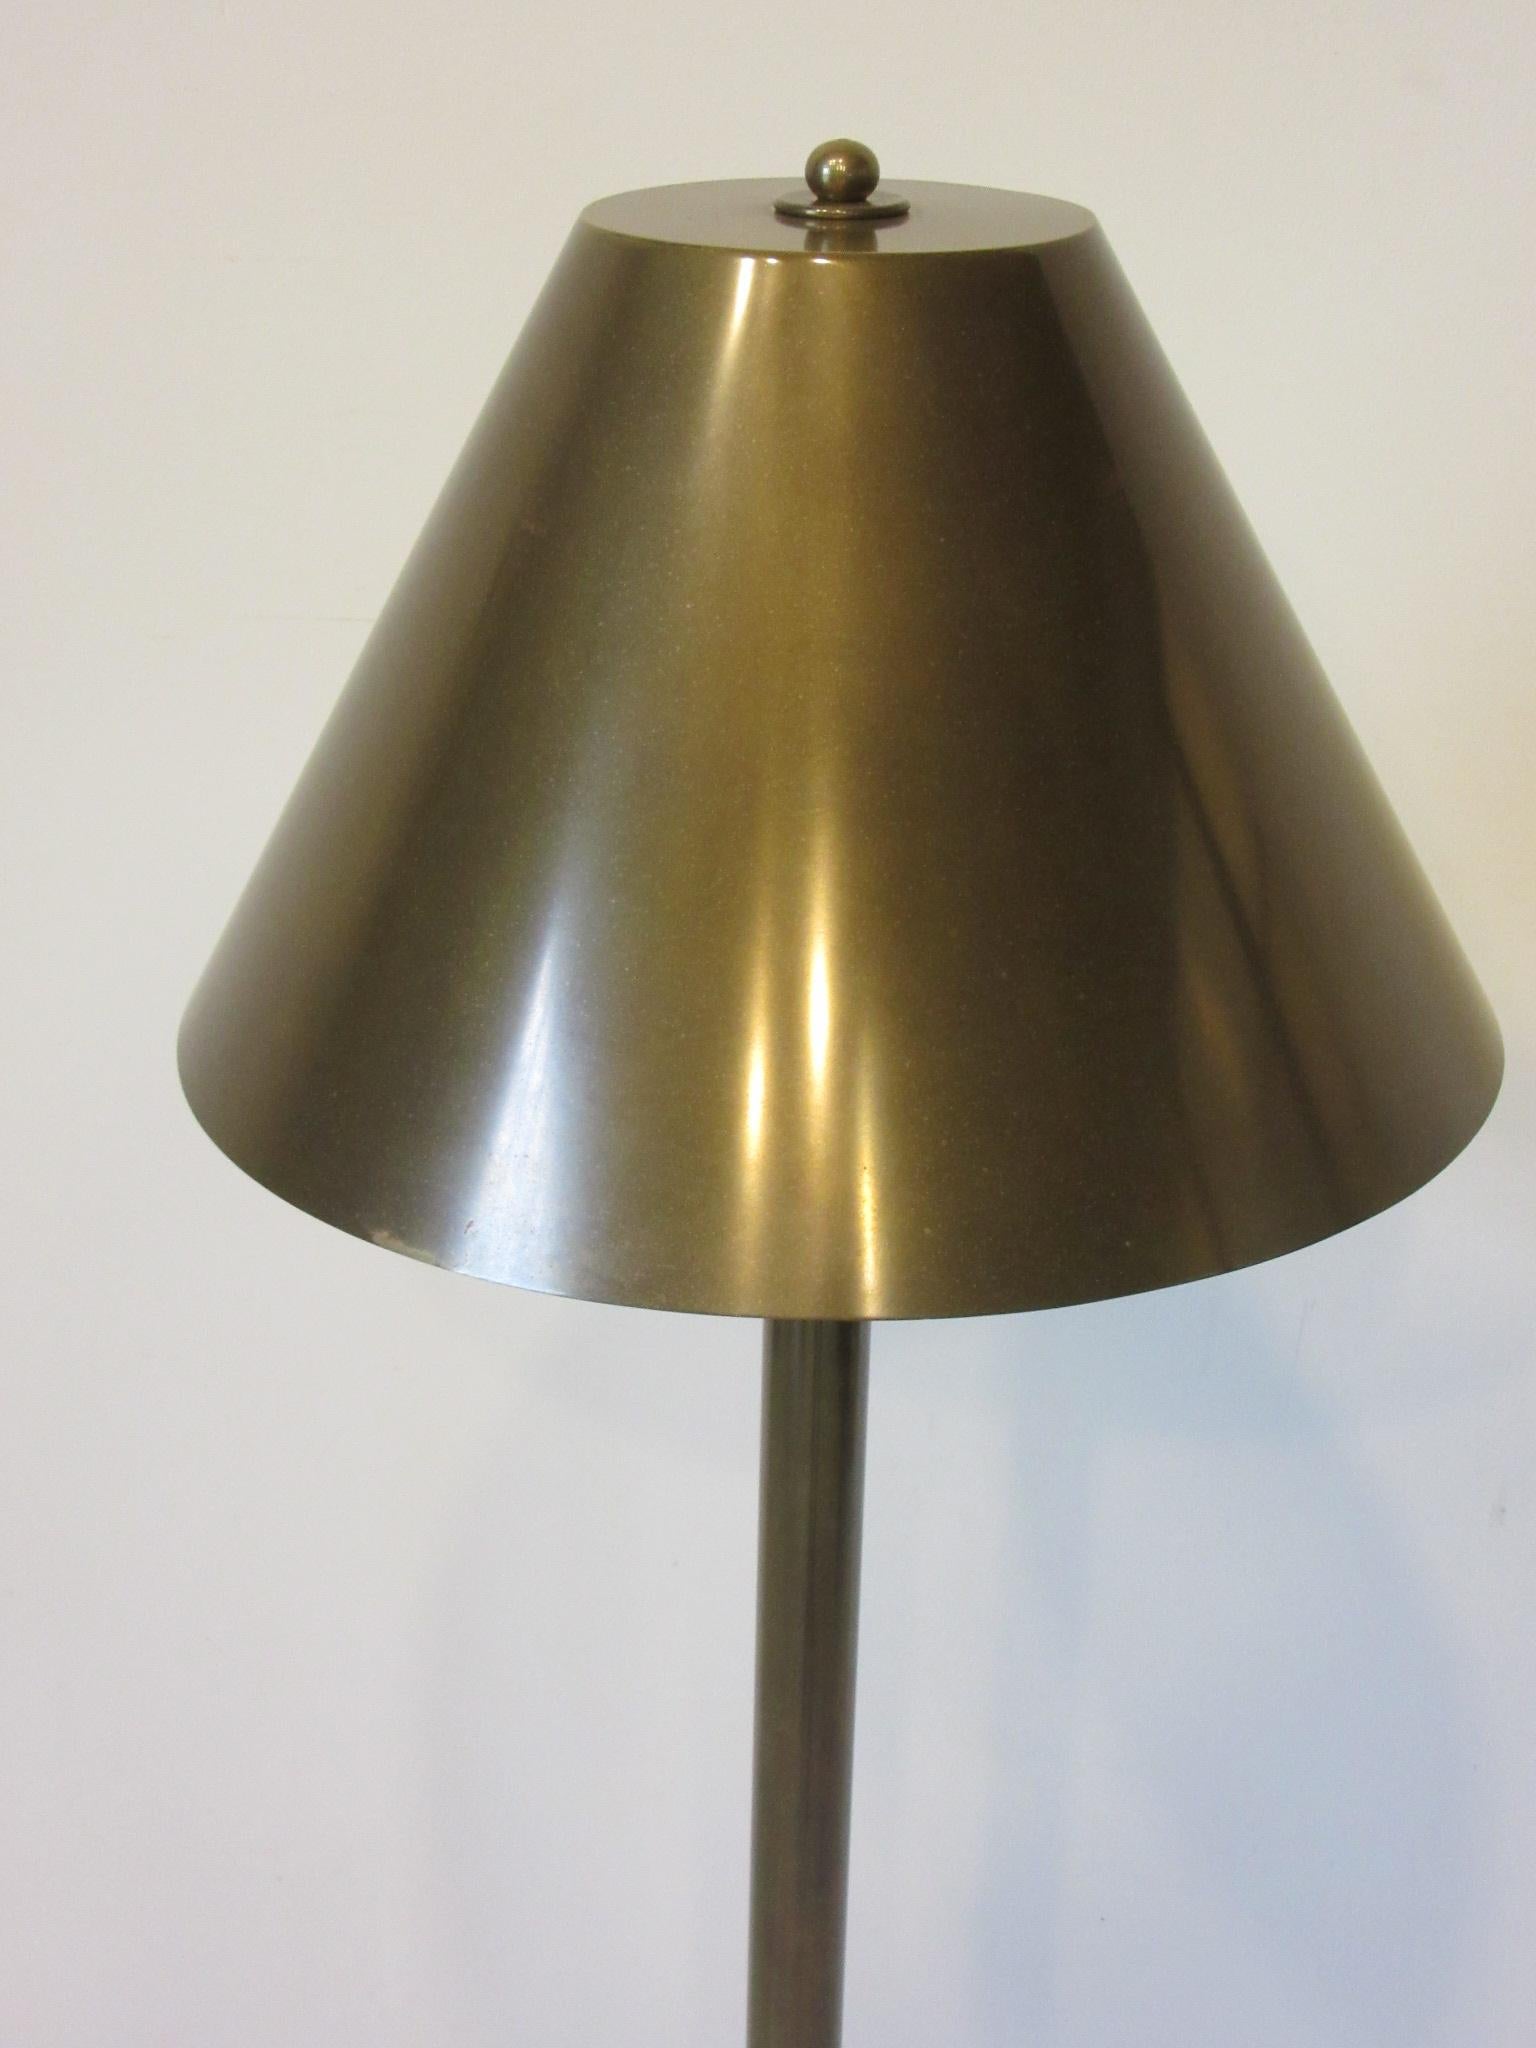 A very well crafted brass floor lamp with hand soldered shade and heavy base attributed to the fine lighting manufacturer of Chapman Studios. The real beauty of this lamp other than quality is that the design will fit in many styles of interiors and